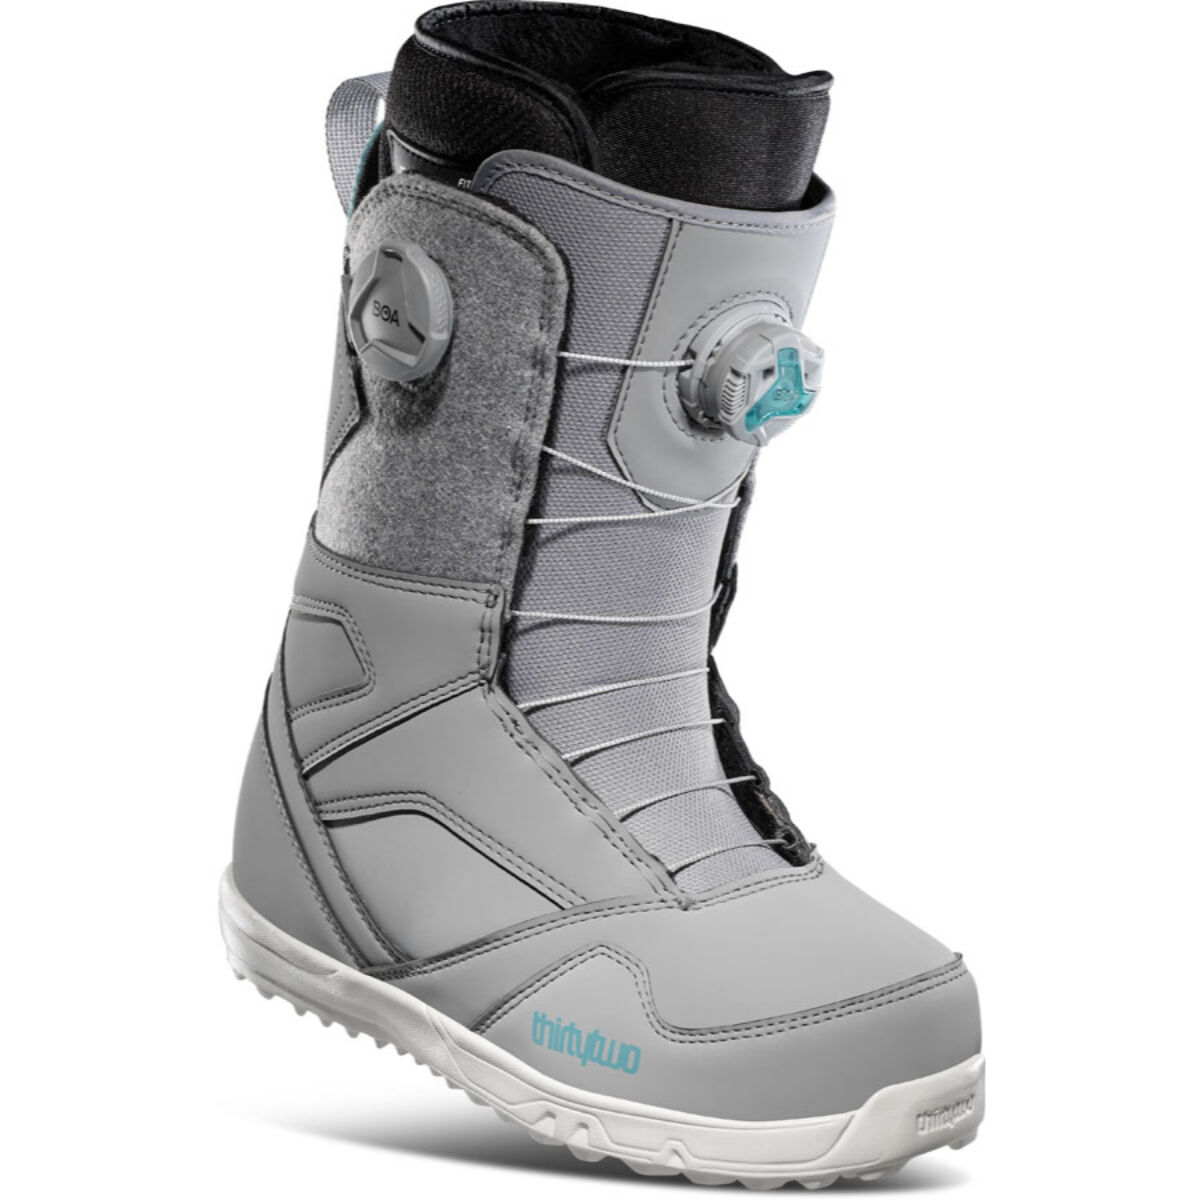 ThirtyTwo STW Double Boa Snowboard Boots Womens | Christy Sports